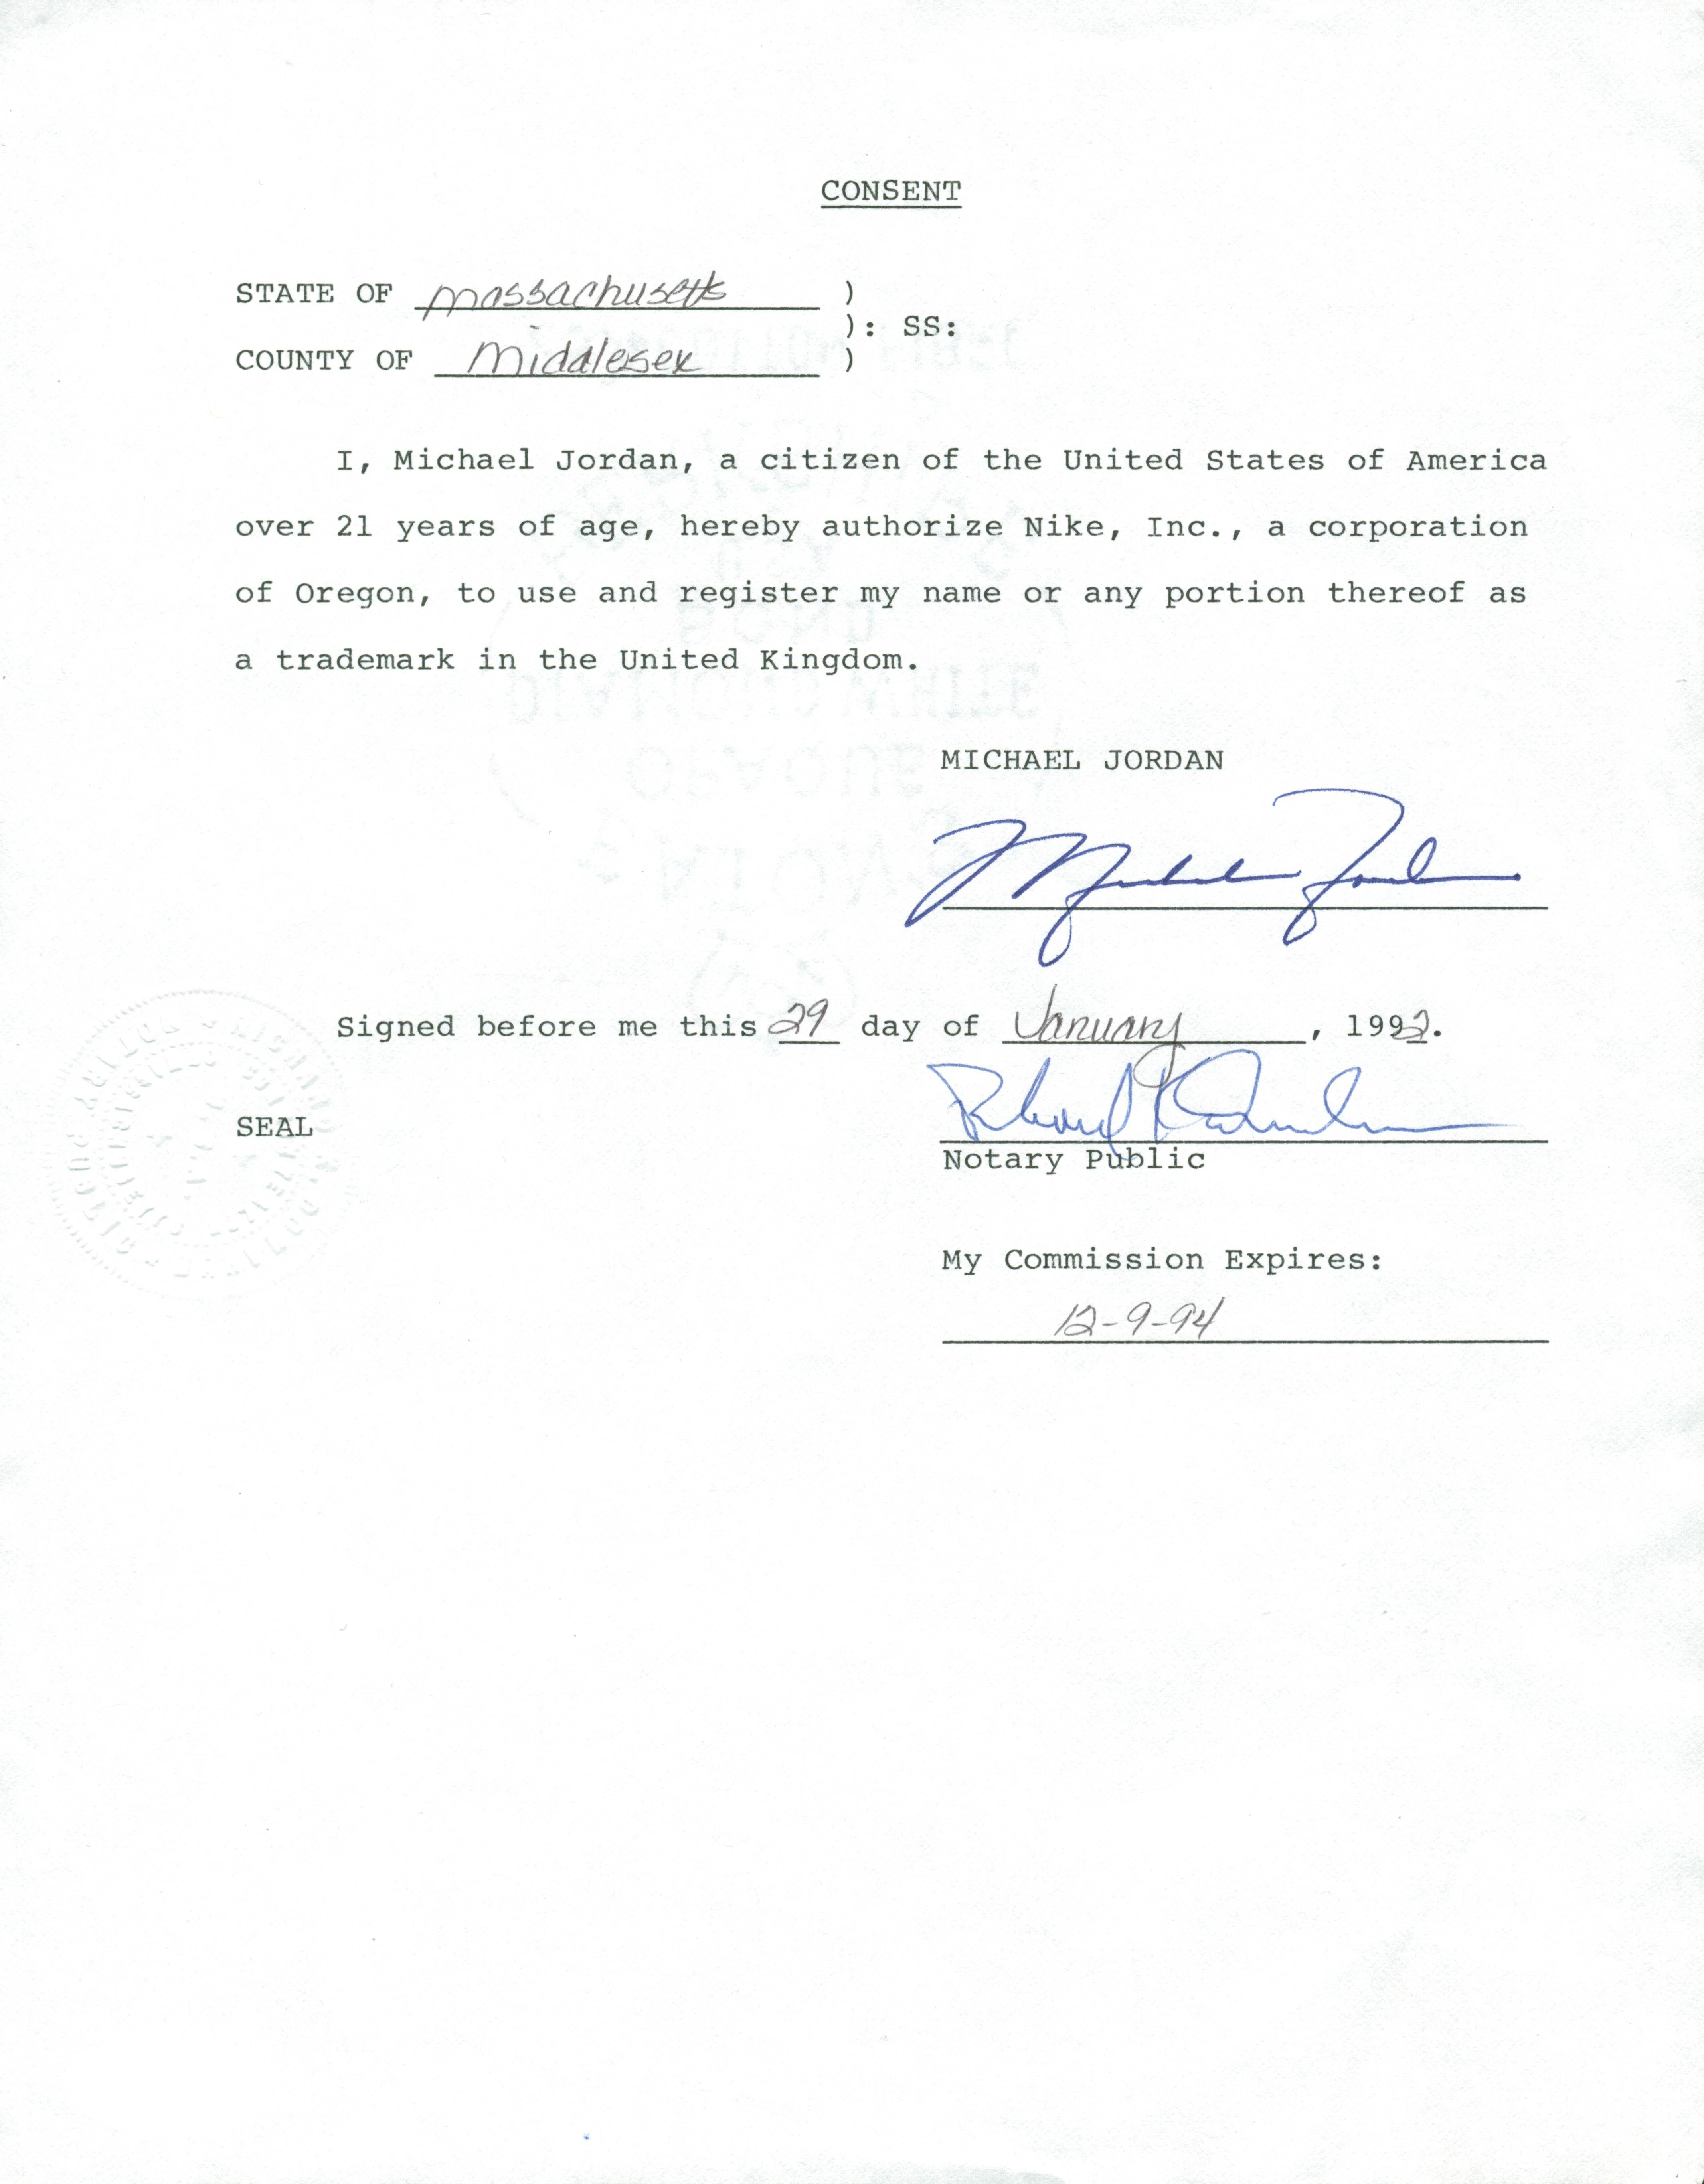 jordan's contract with nike